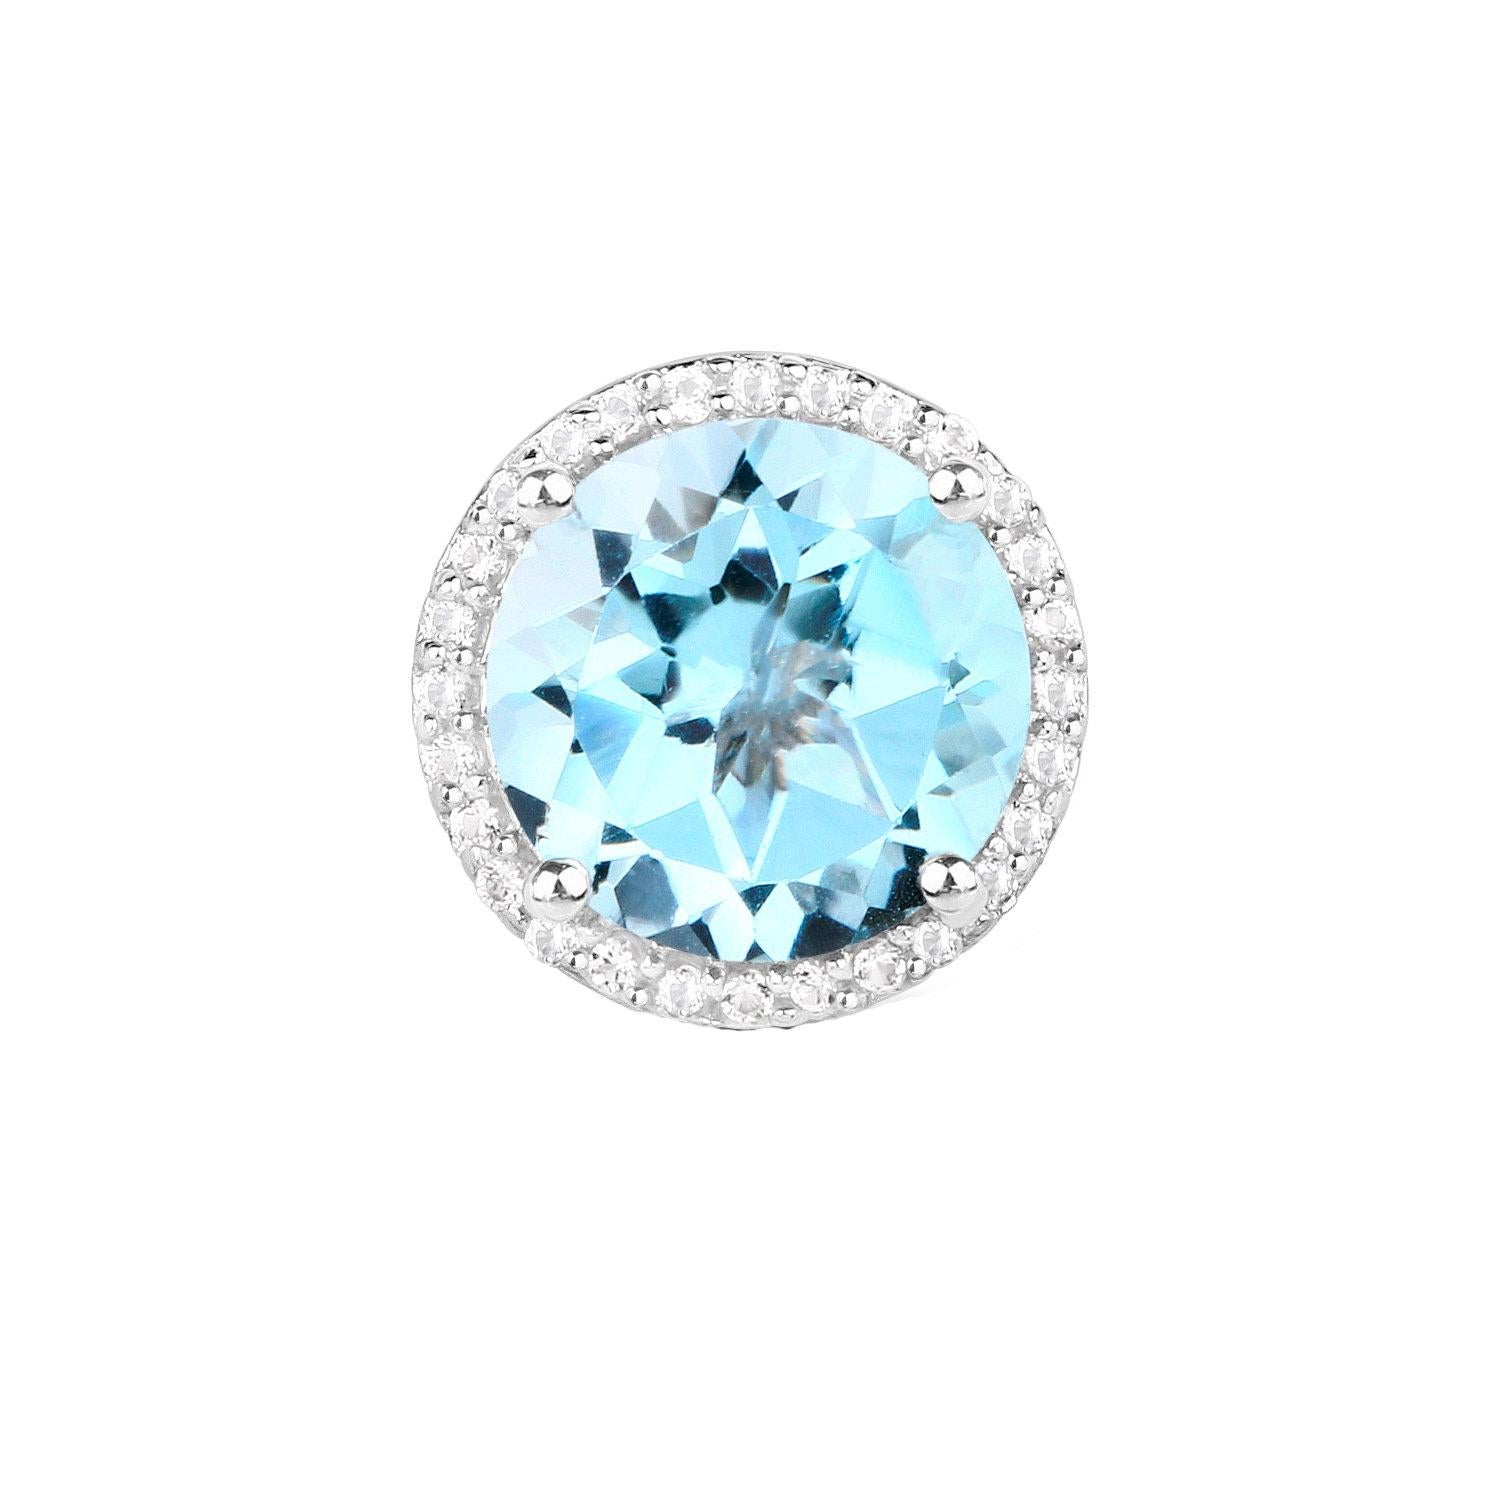 Round Cut Blue Topaz Stud Earrings White Topaz Halo 7.7 Carats Rhodium Plated Silver For Sale